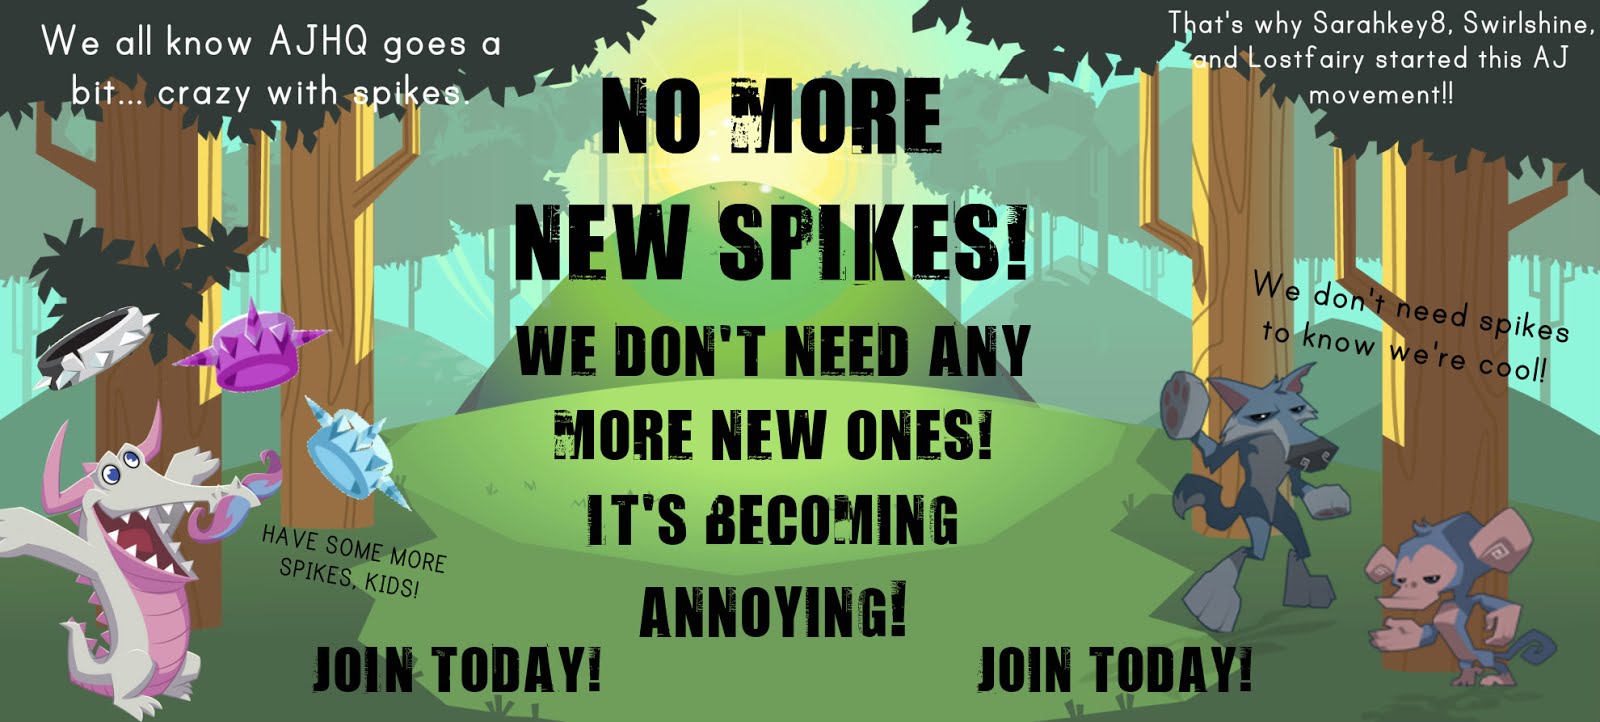 Join The "No More New Spikes" Movement!